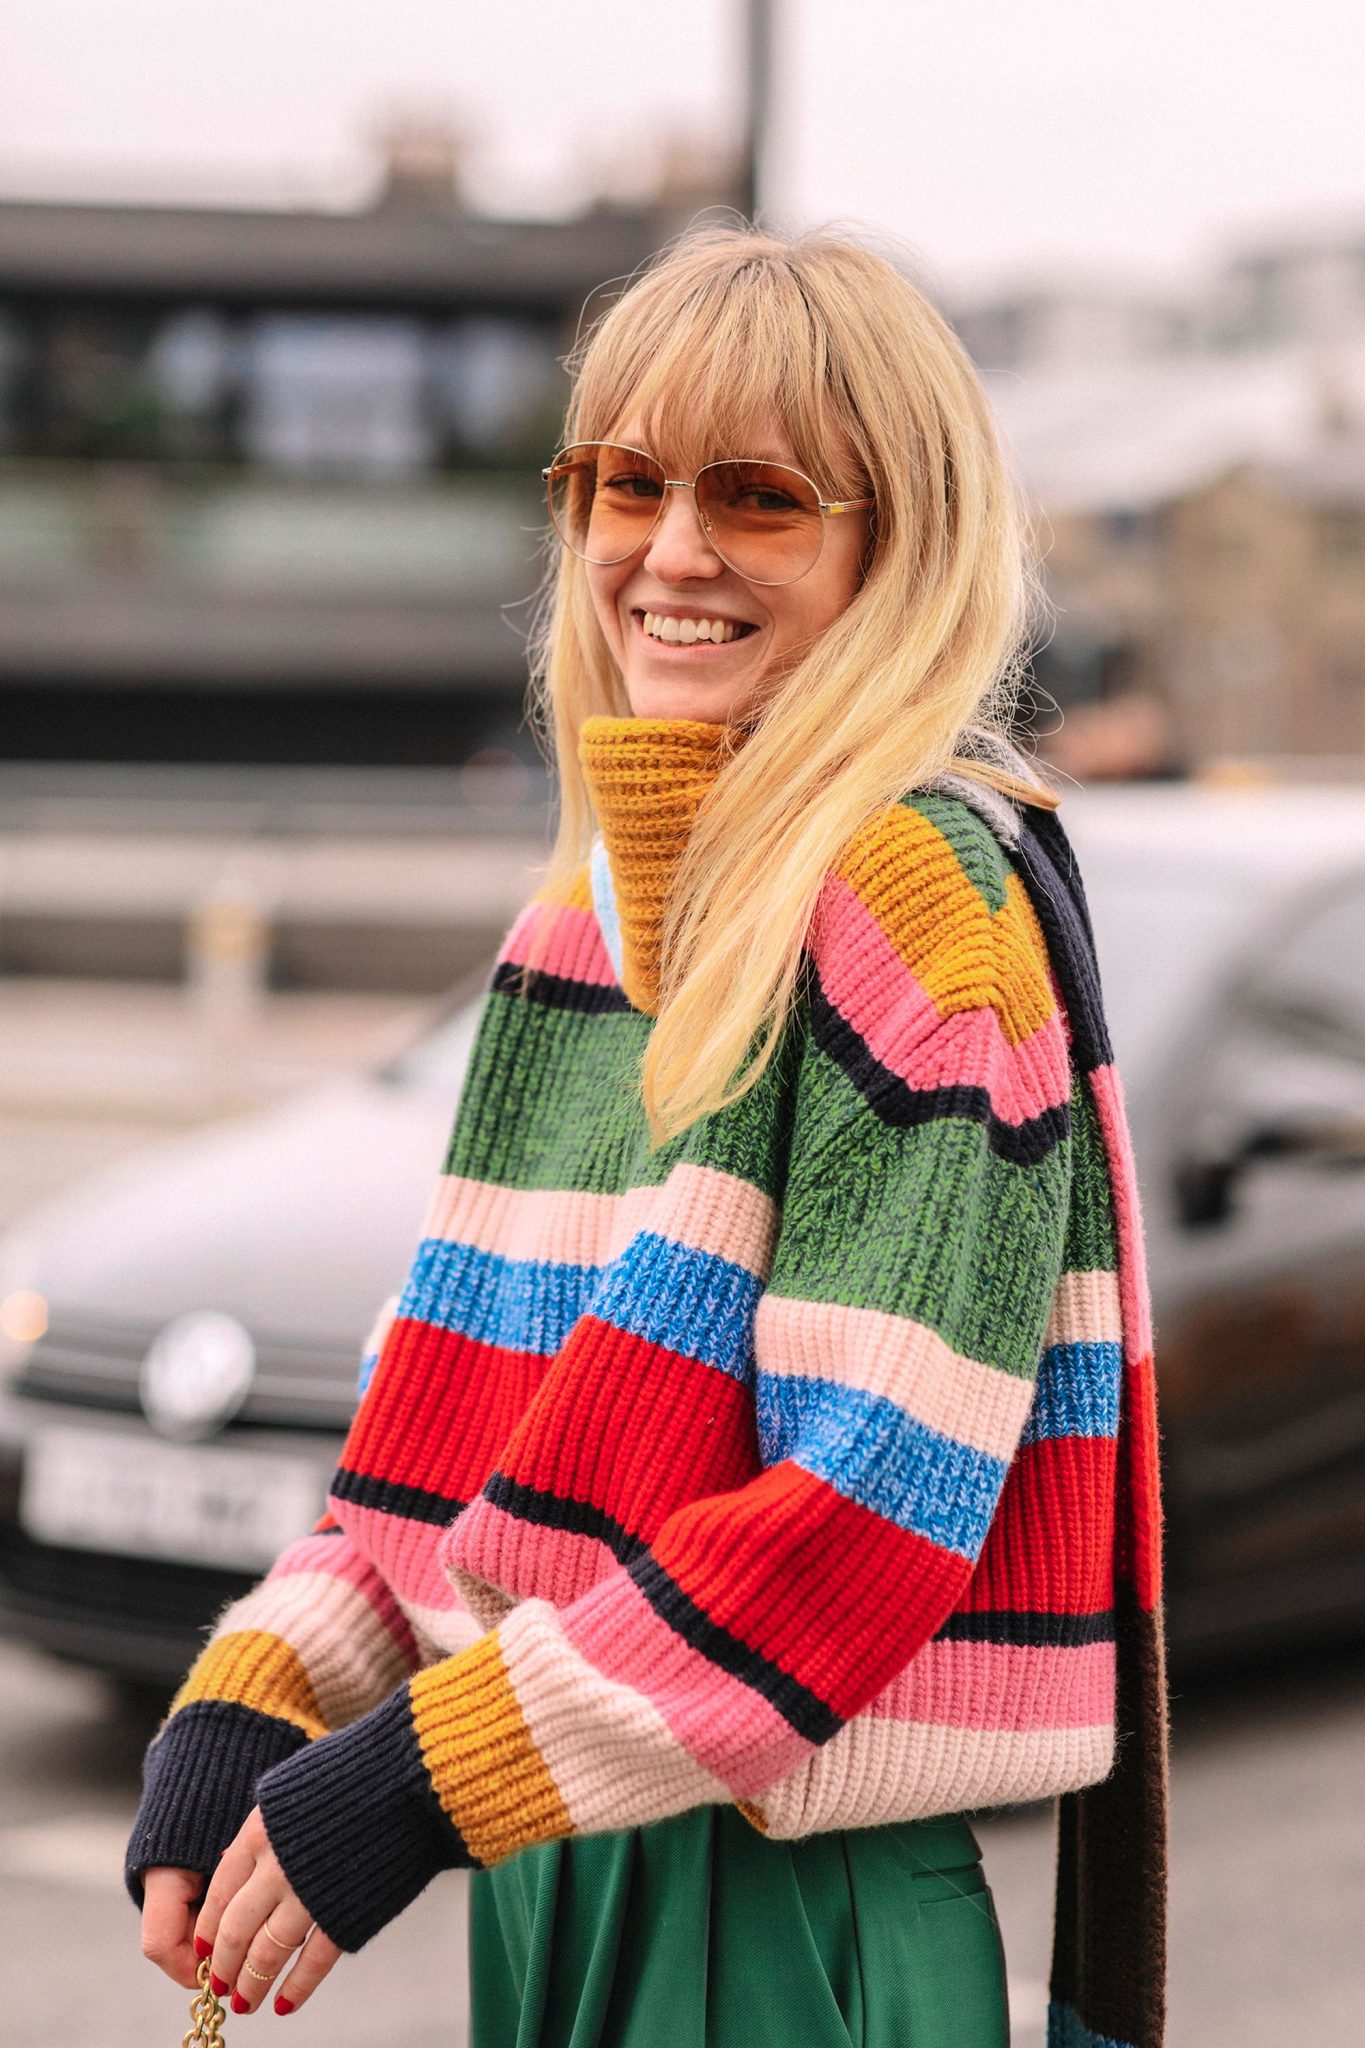 the spring haircut trend we’re importing from london